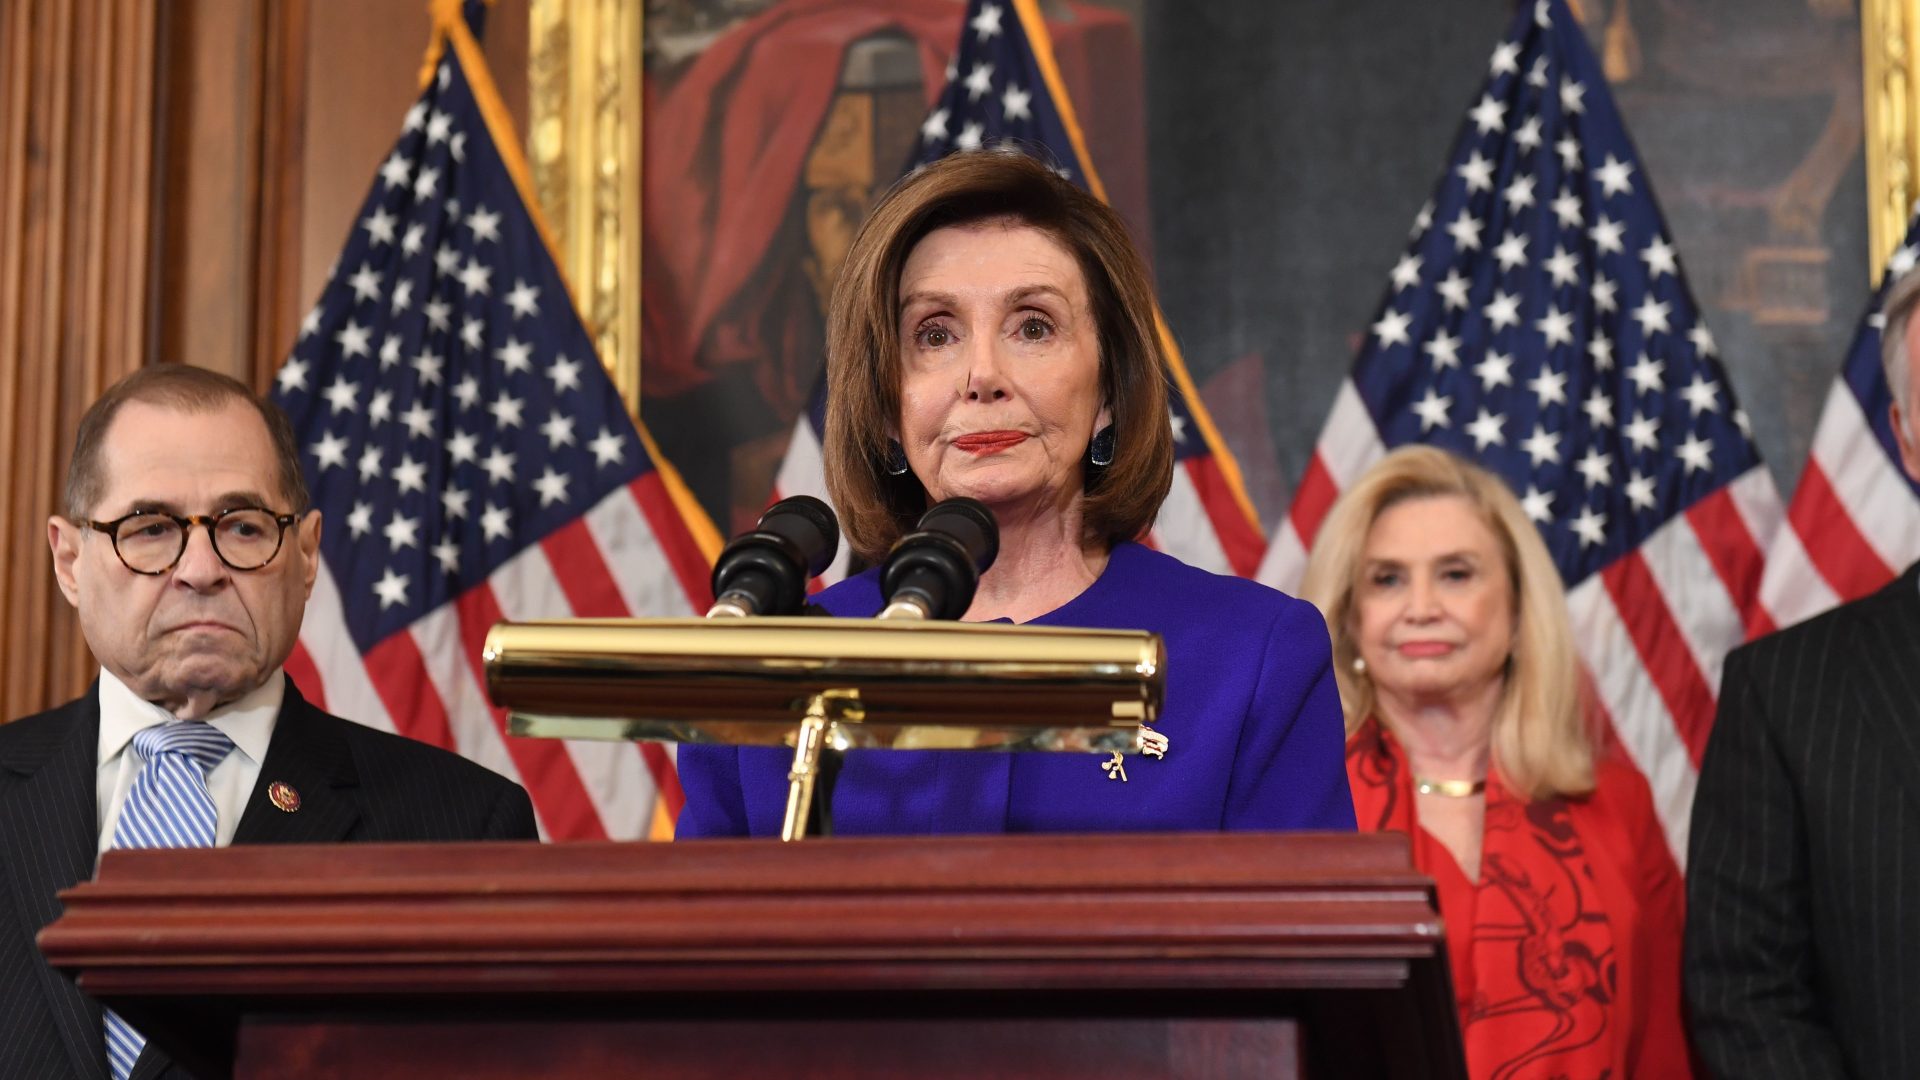 House Speaker Nancy Pelosi and the chairs of investigative committees announce the articles of impeachment against President Trump on Tuesday.